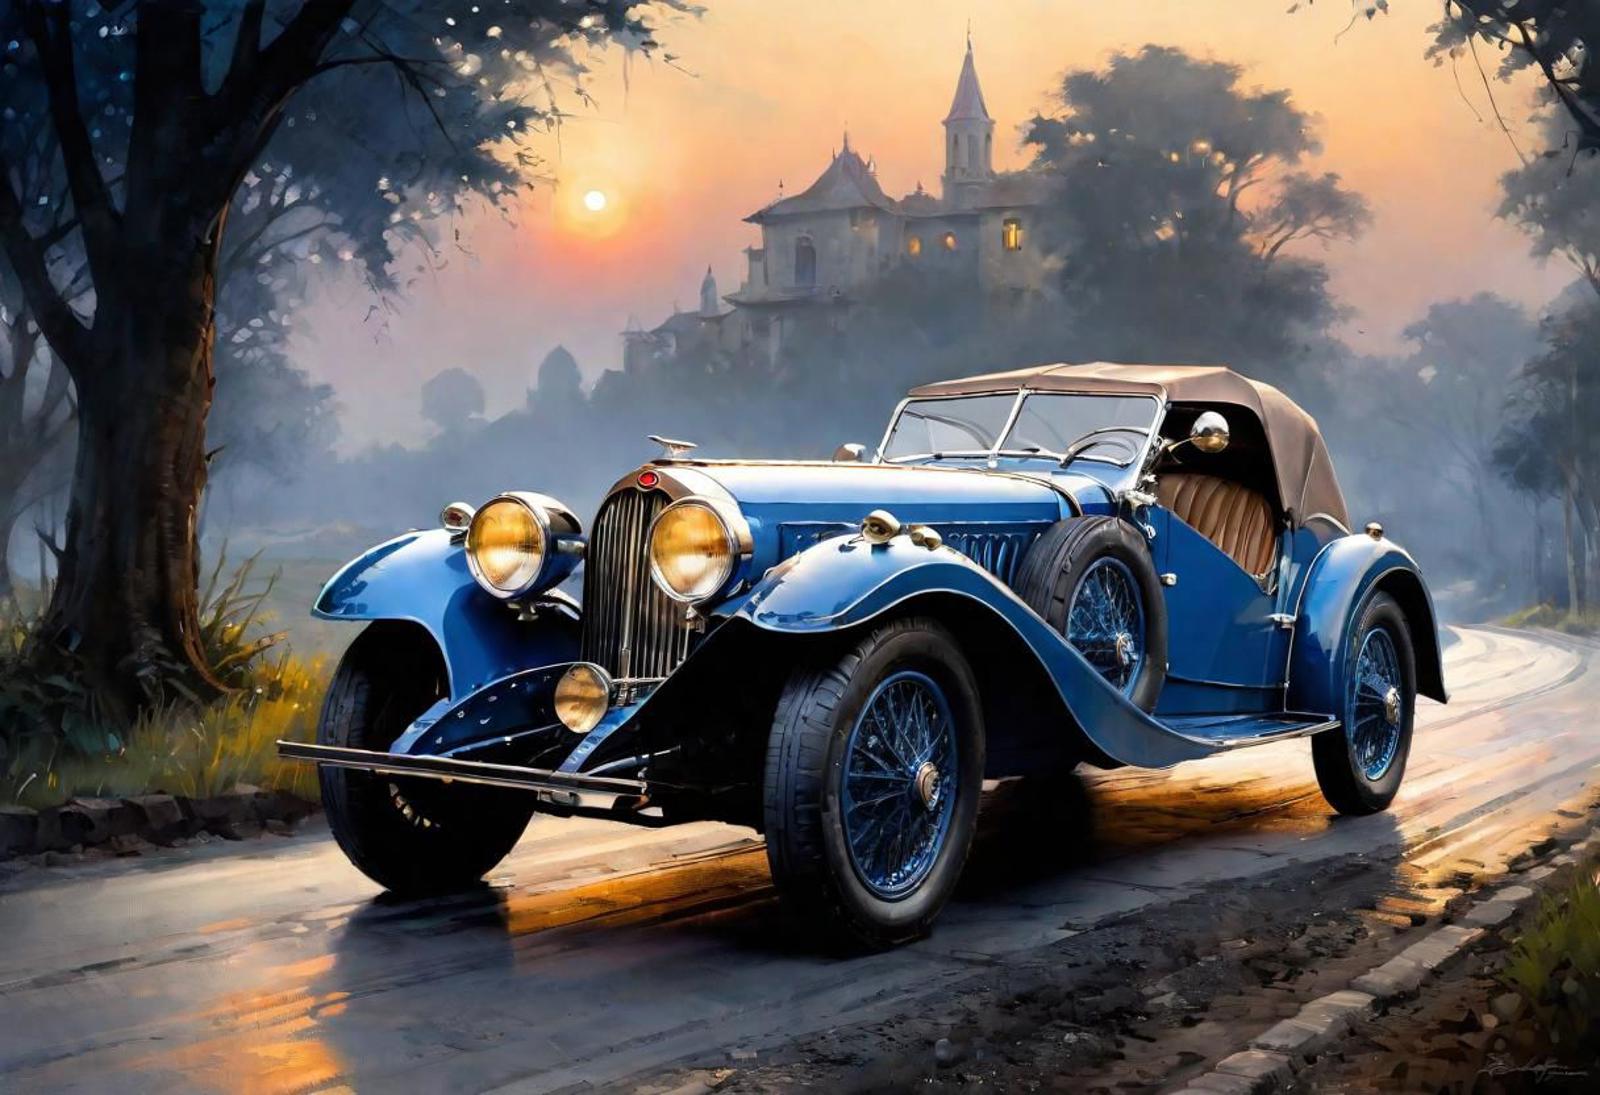 An Artistic Painting of a Blue Antique Car Driving Down the Road